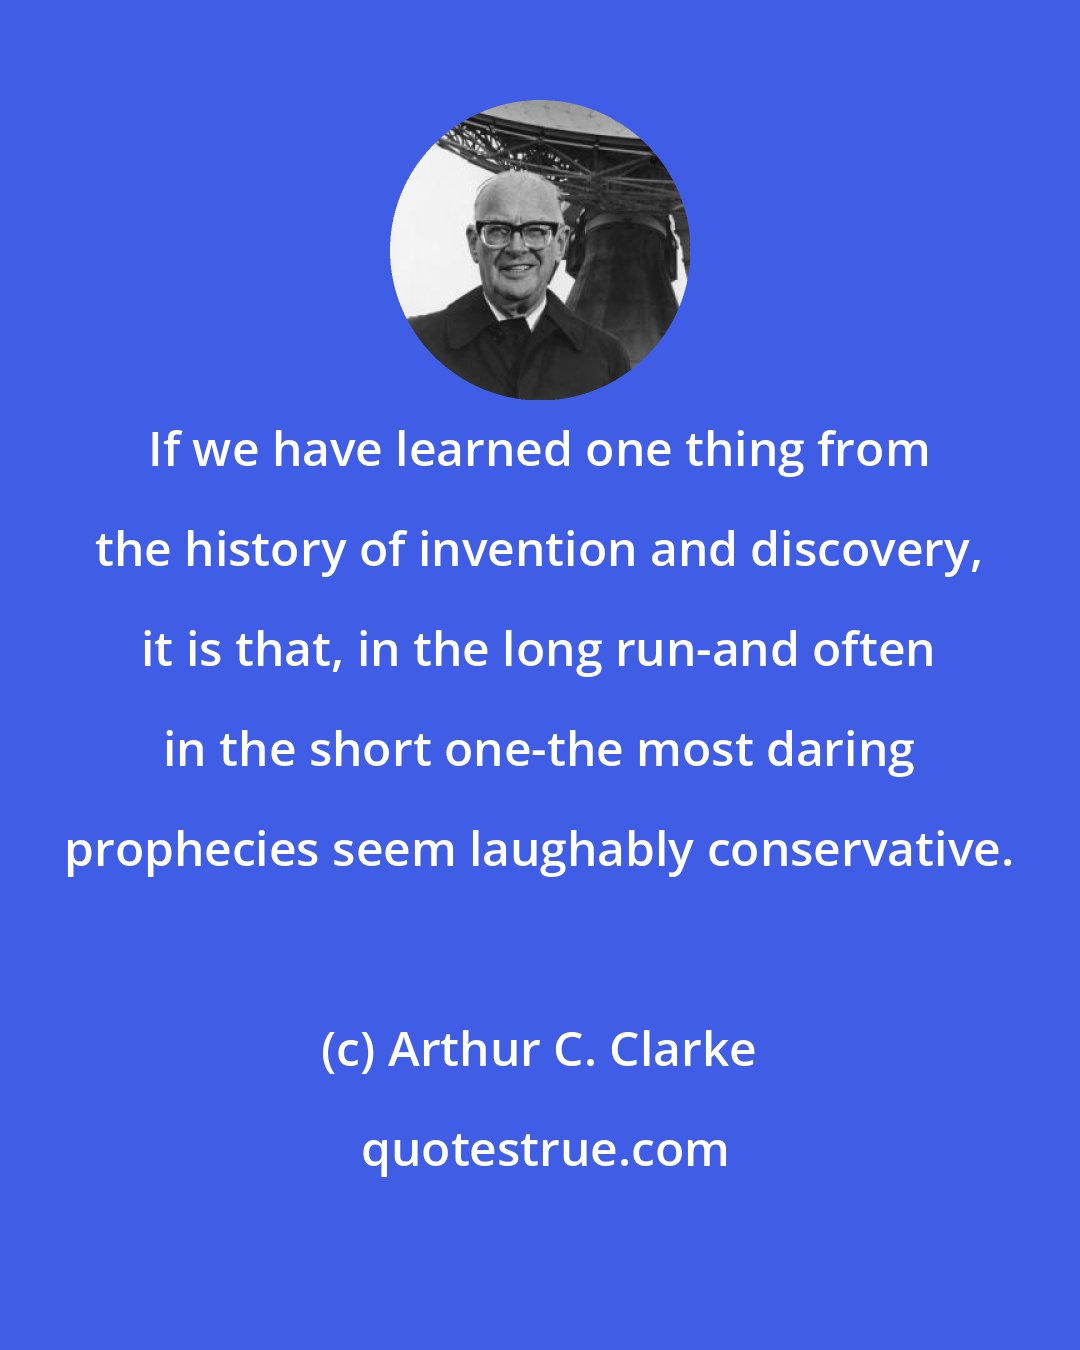 Arthur C. Clarke: If we have learned one thing from the history of invention and discovery, it is that, in the long run-and often in the short one-the most daring prophecies seem laughably conservative.